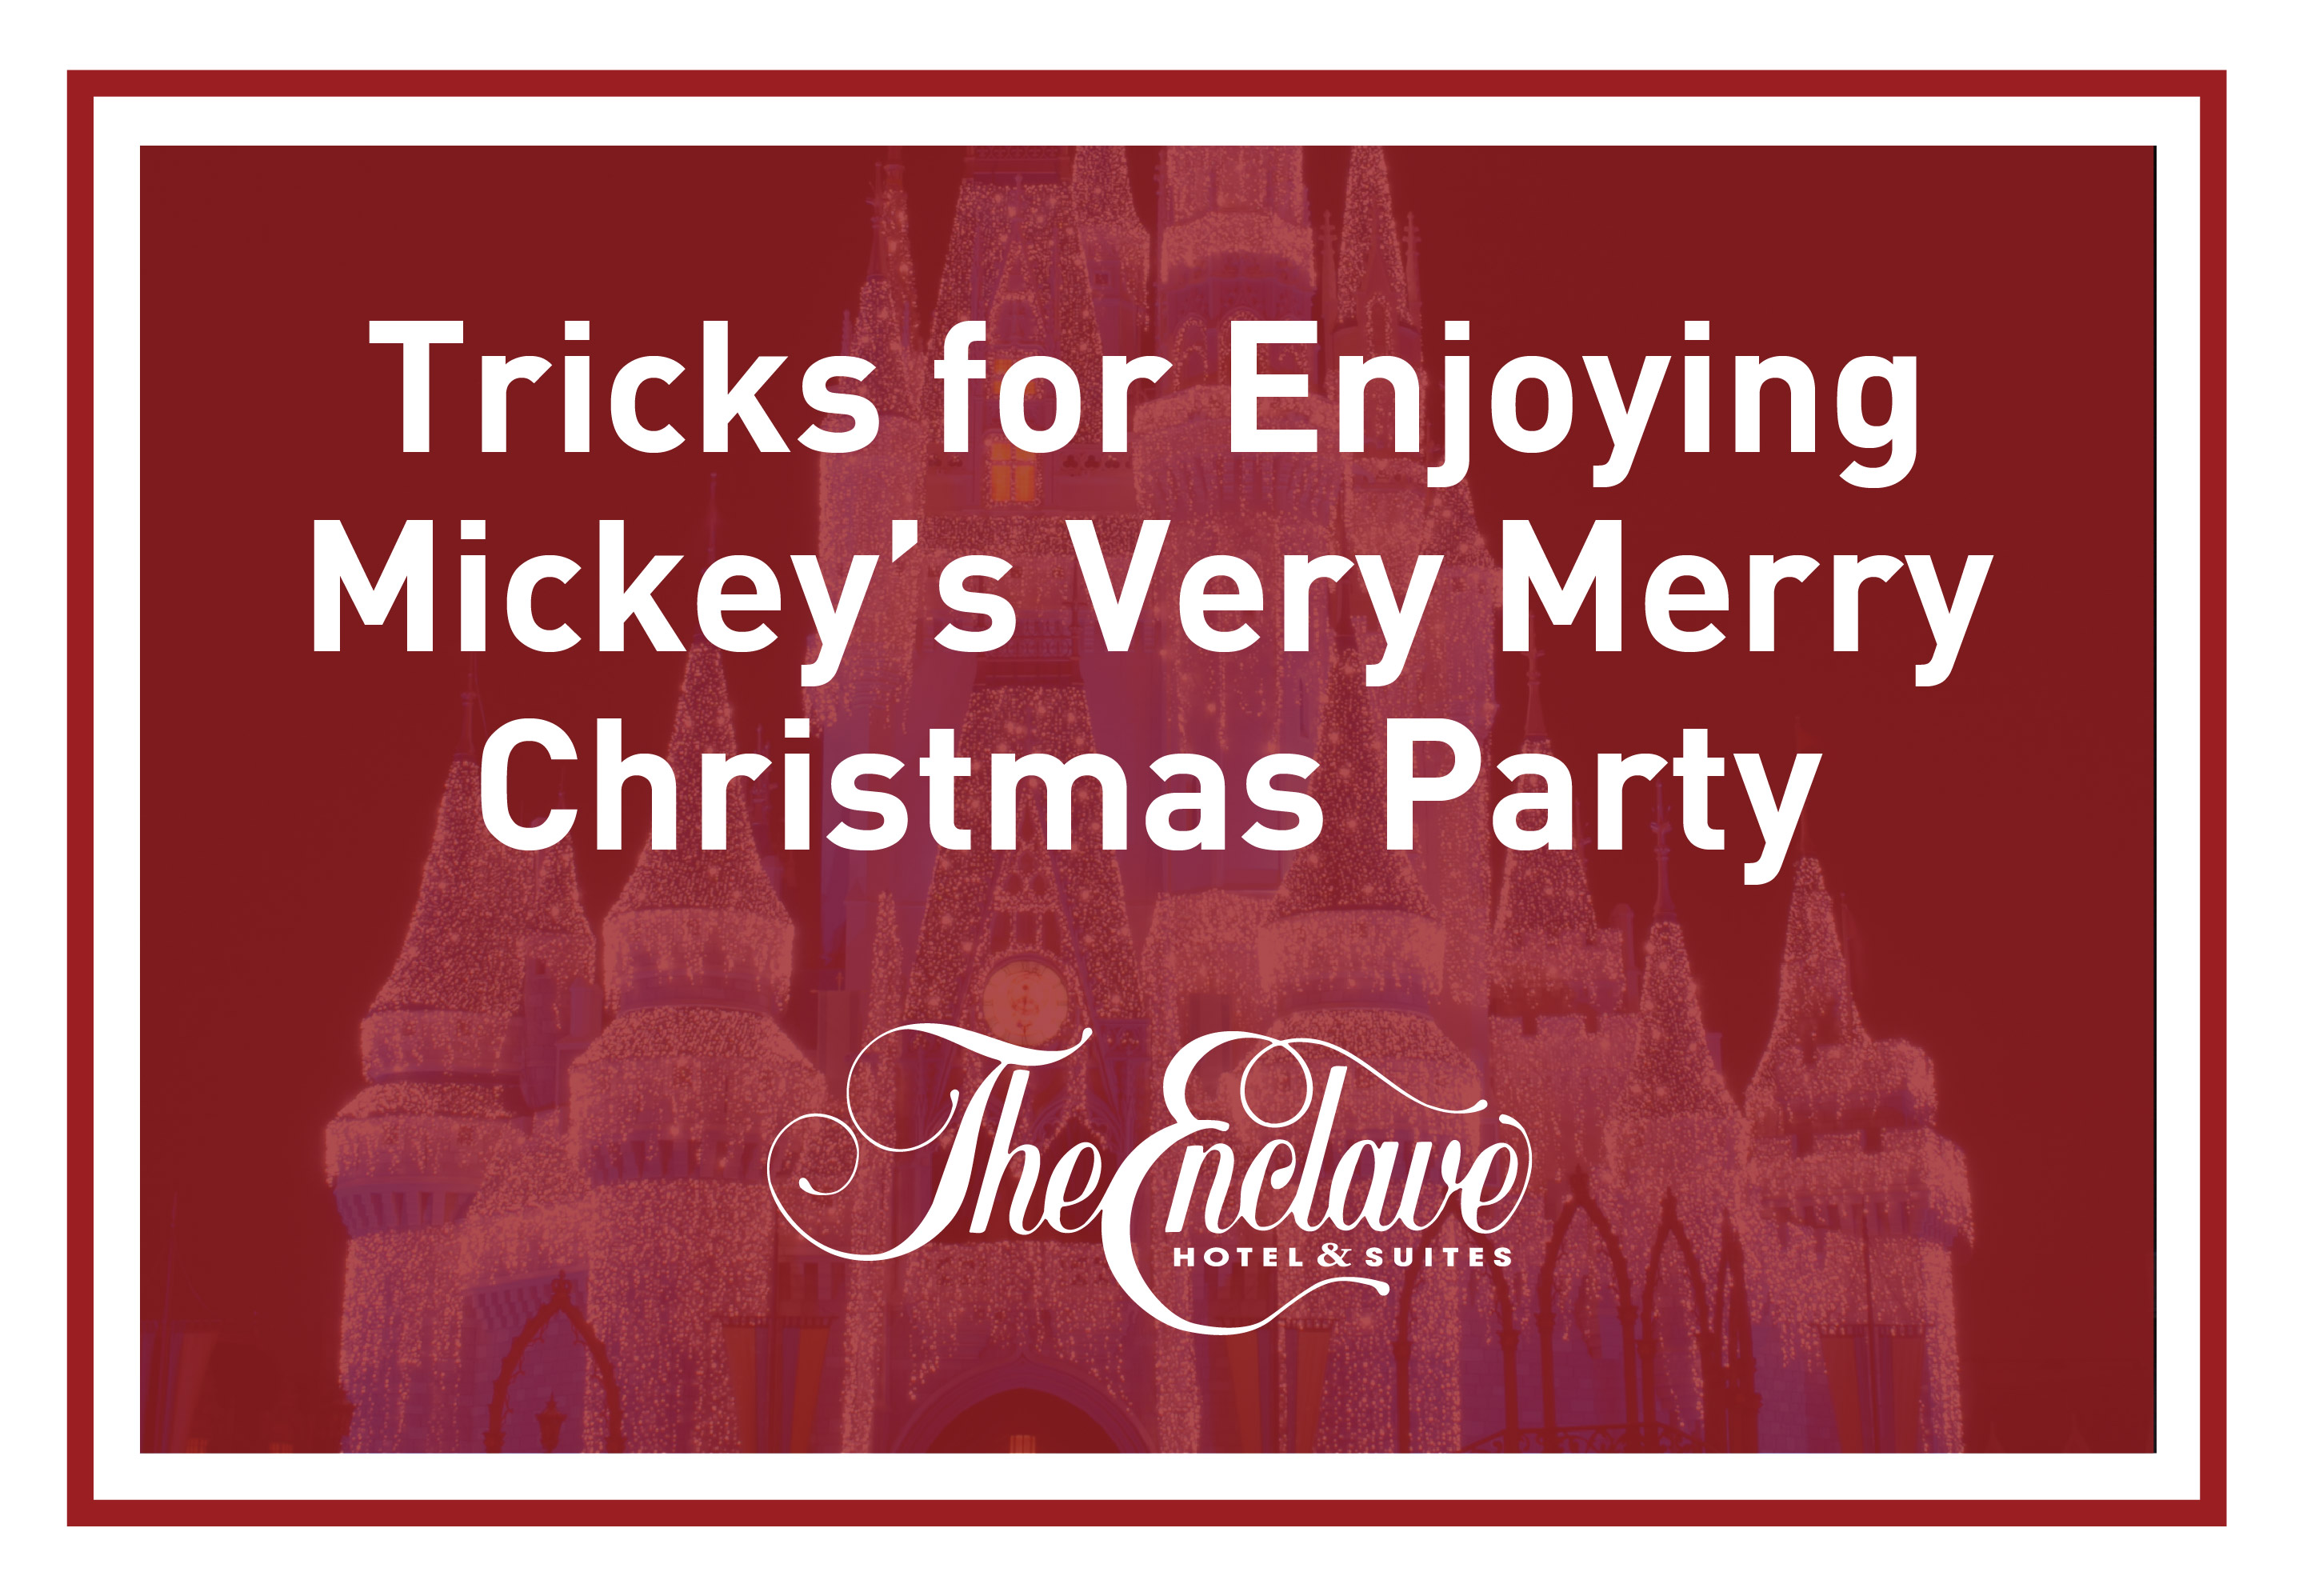 Tricks for Enjoying Mickey’s Very Merry Christmas Party